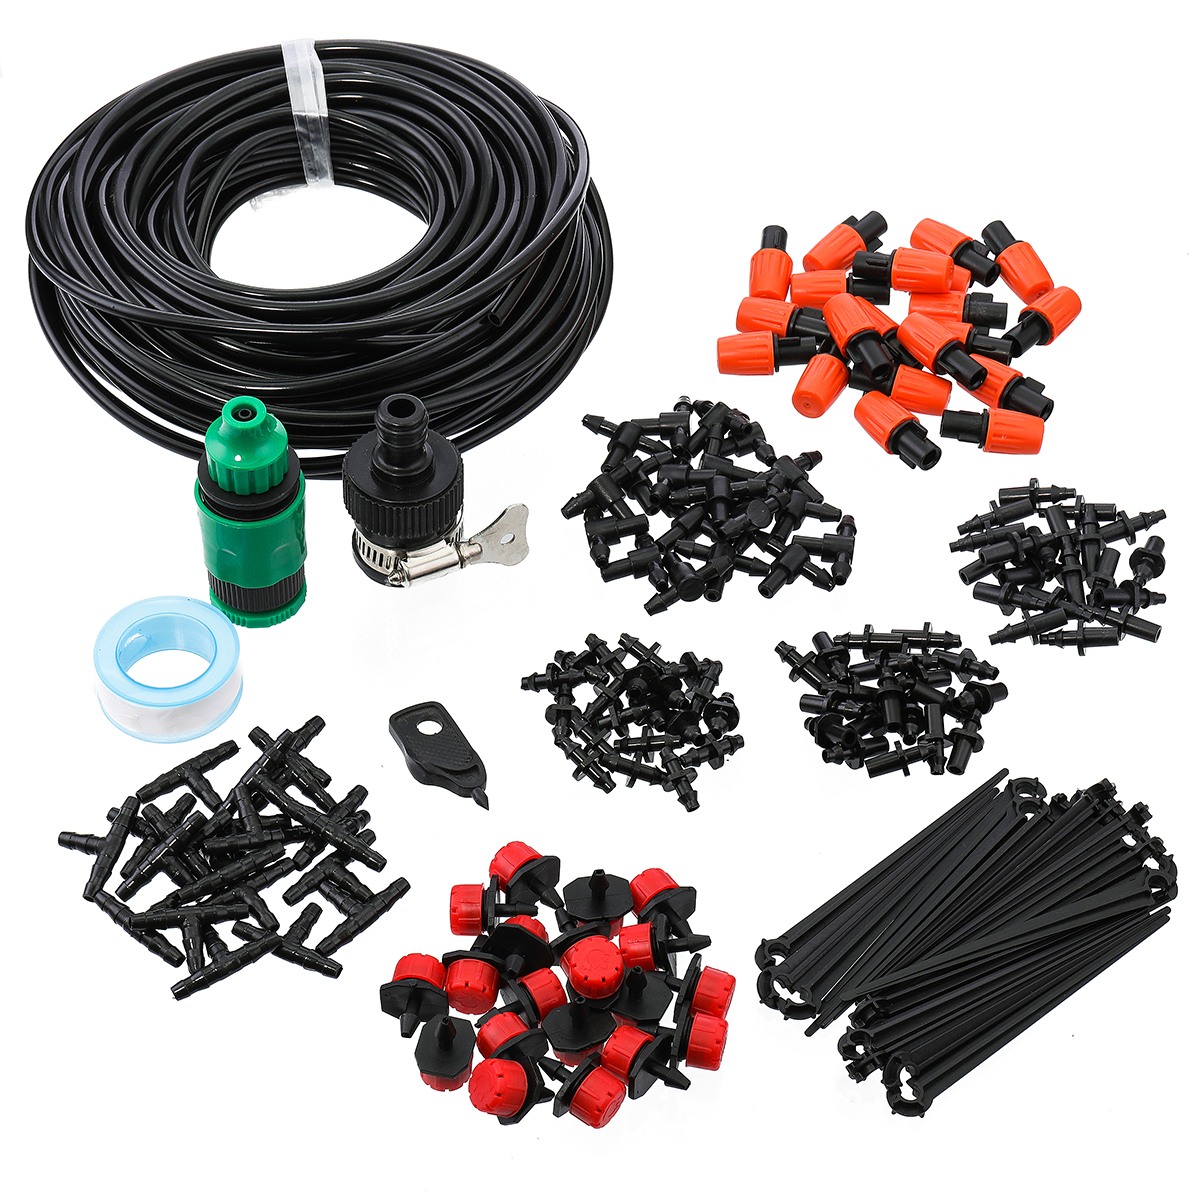 

Drip Irrigation Kits Plant Watering Kit with Distribution Tubing Hose Irrigation System Automatic Irrigation Set